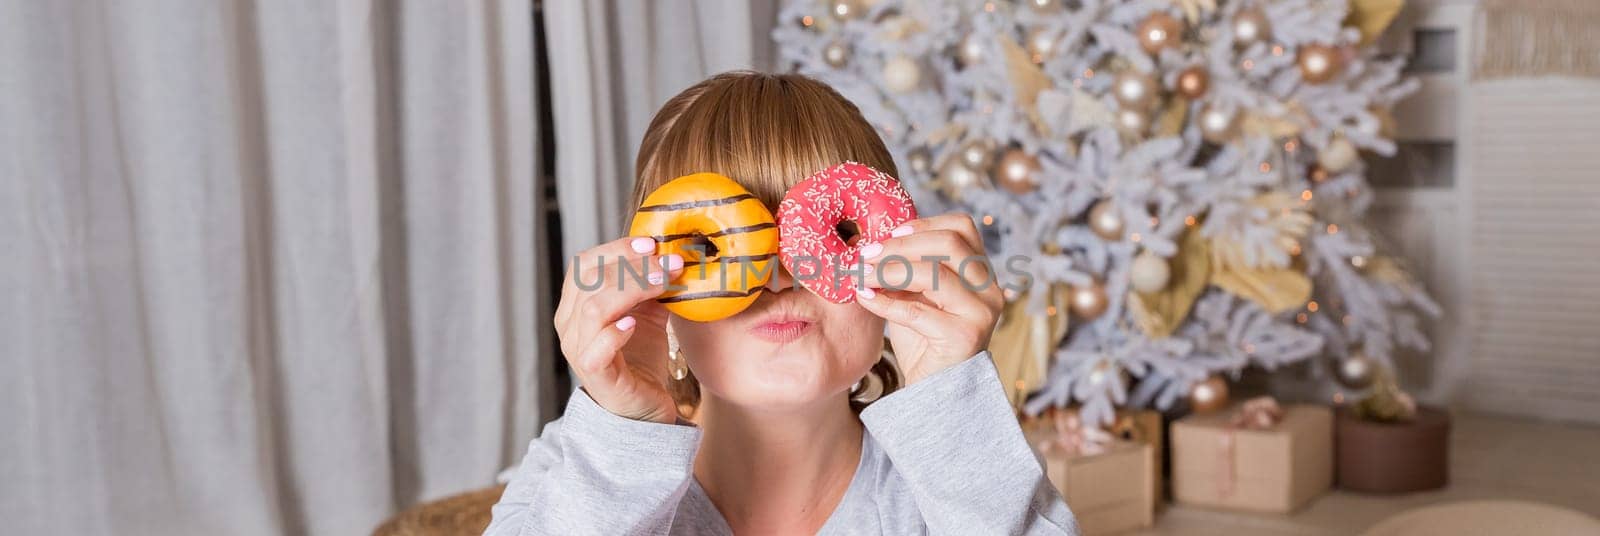 cheerful young woman holds donuts in her hands on christmas tree background, winter holidays. portrait of funny girl in pajamas covering her eyes with donuts by YuliaYaspe1979